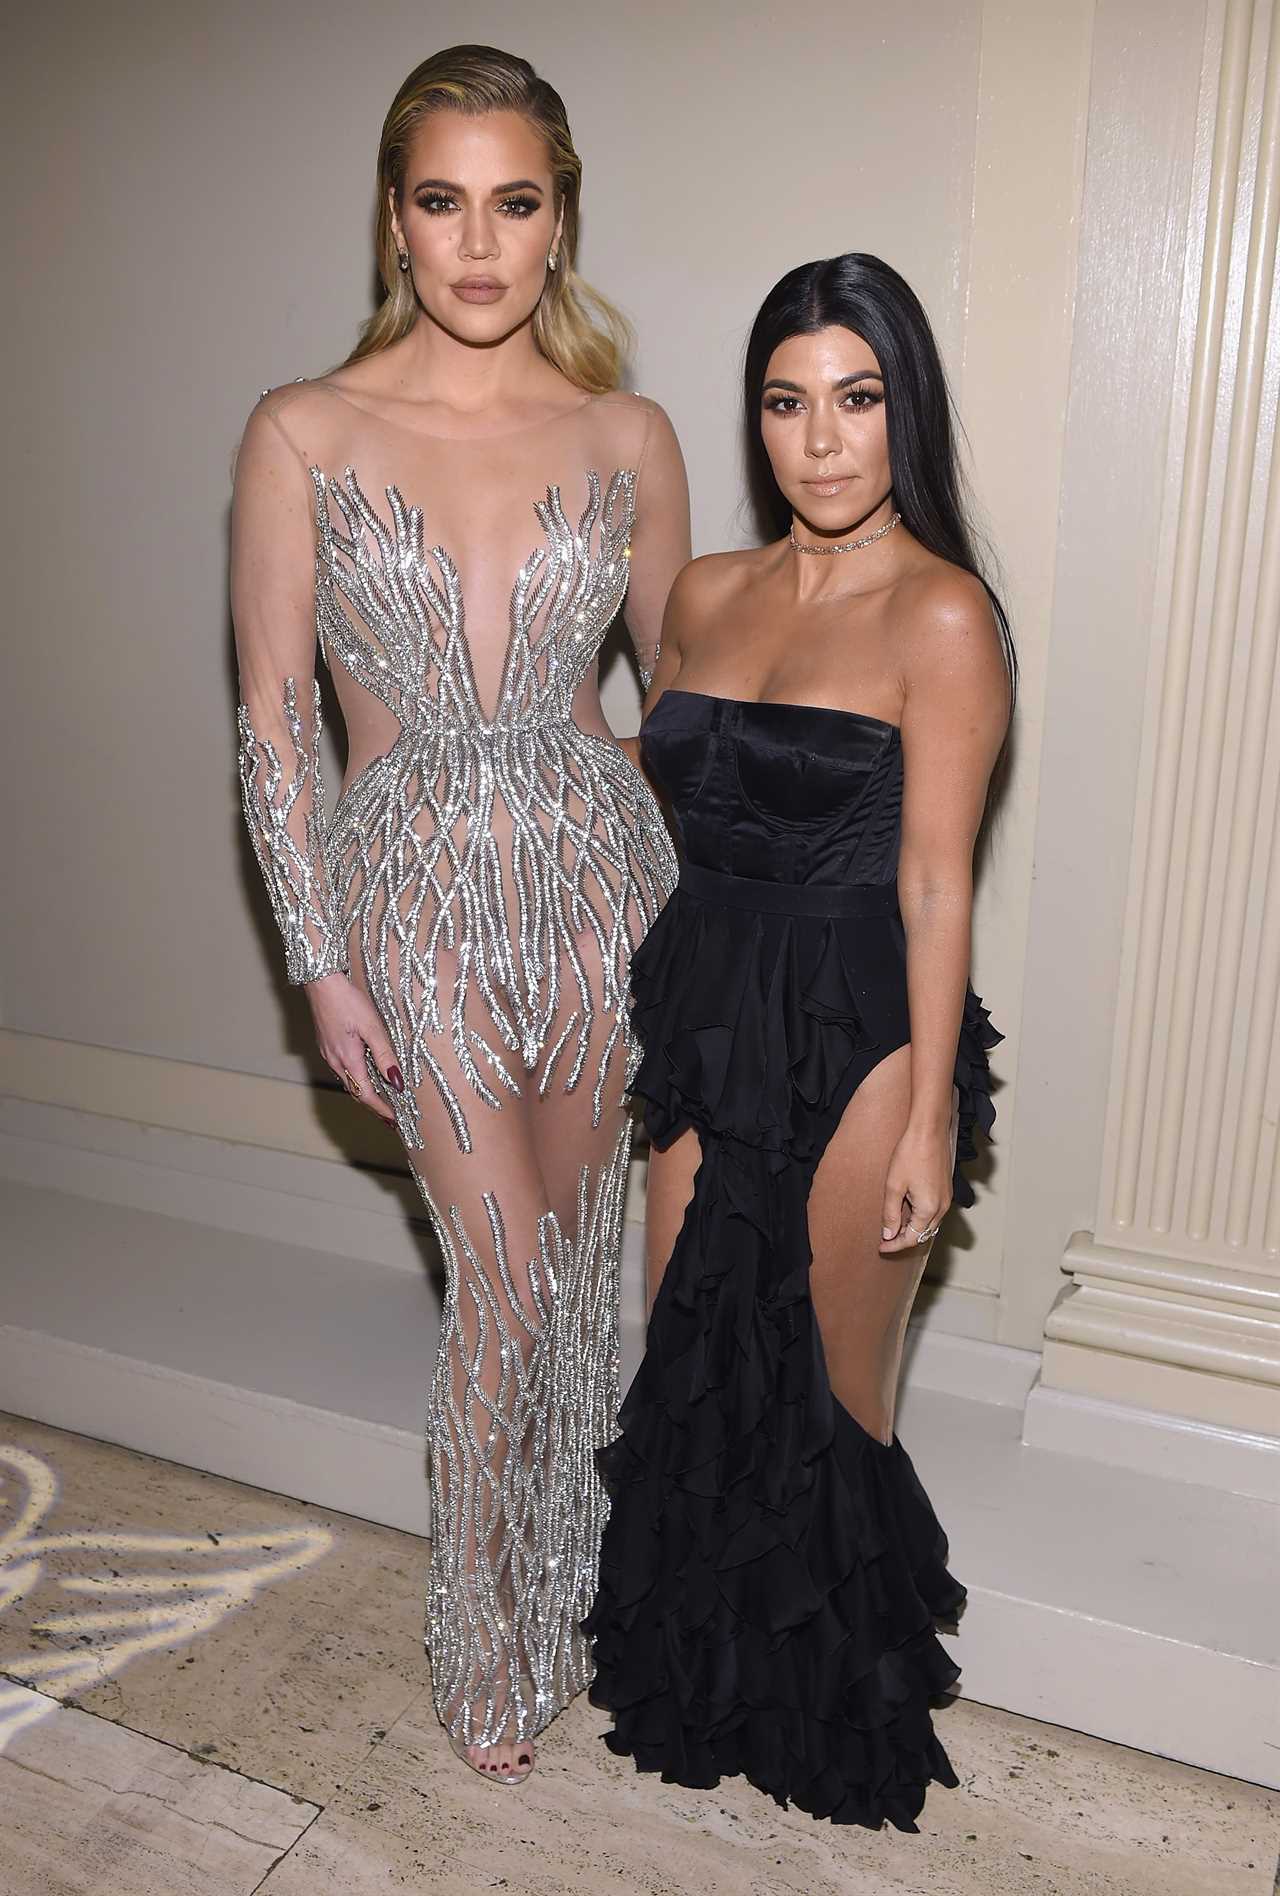 Kardashian fans share theory about why Khloe won’t allow True, 4, to sleepover at Kourtney’s house